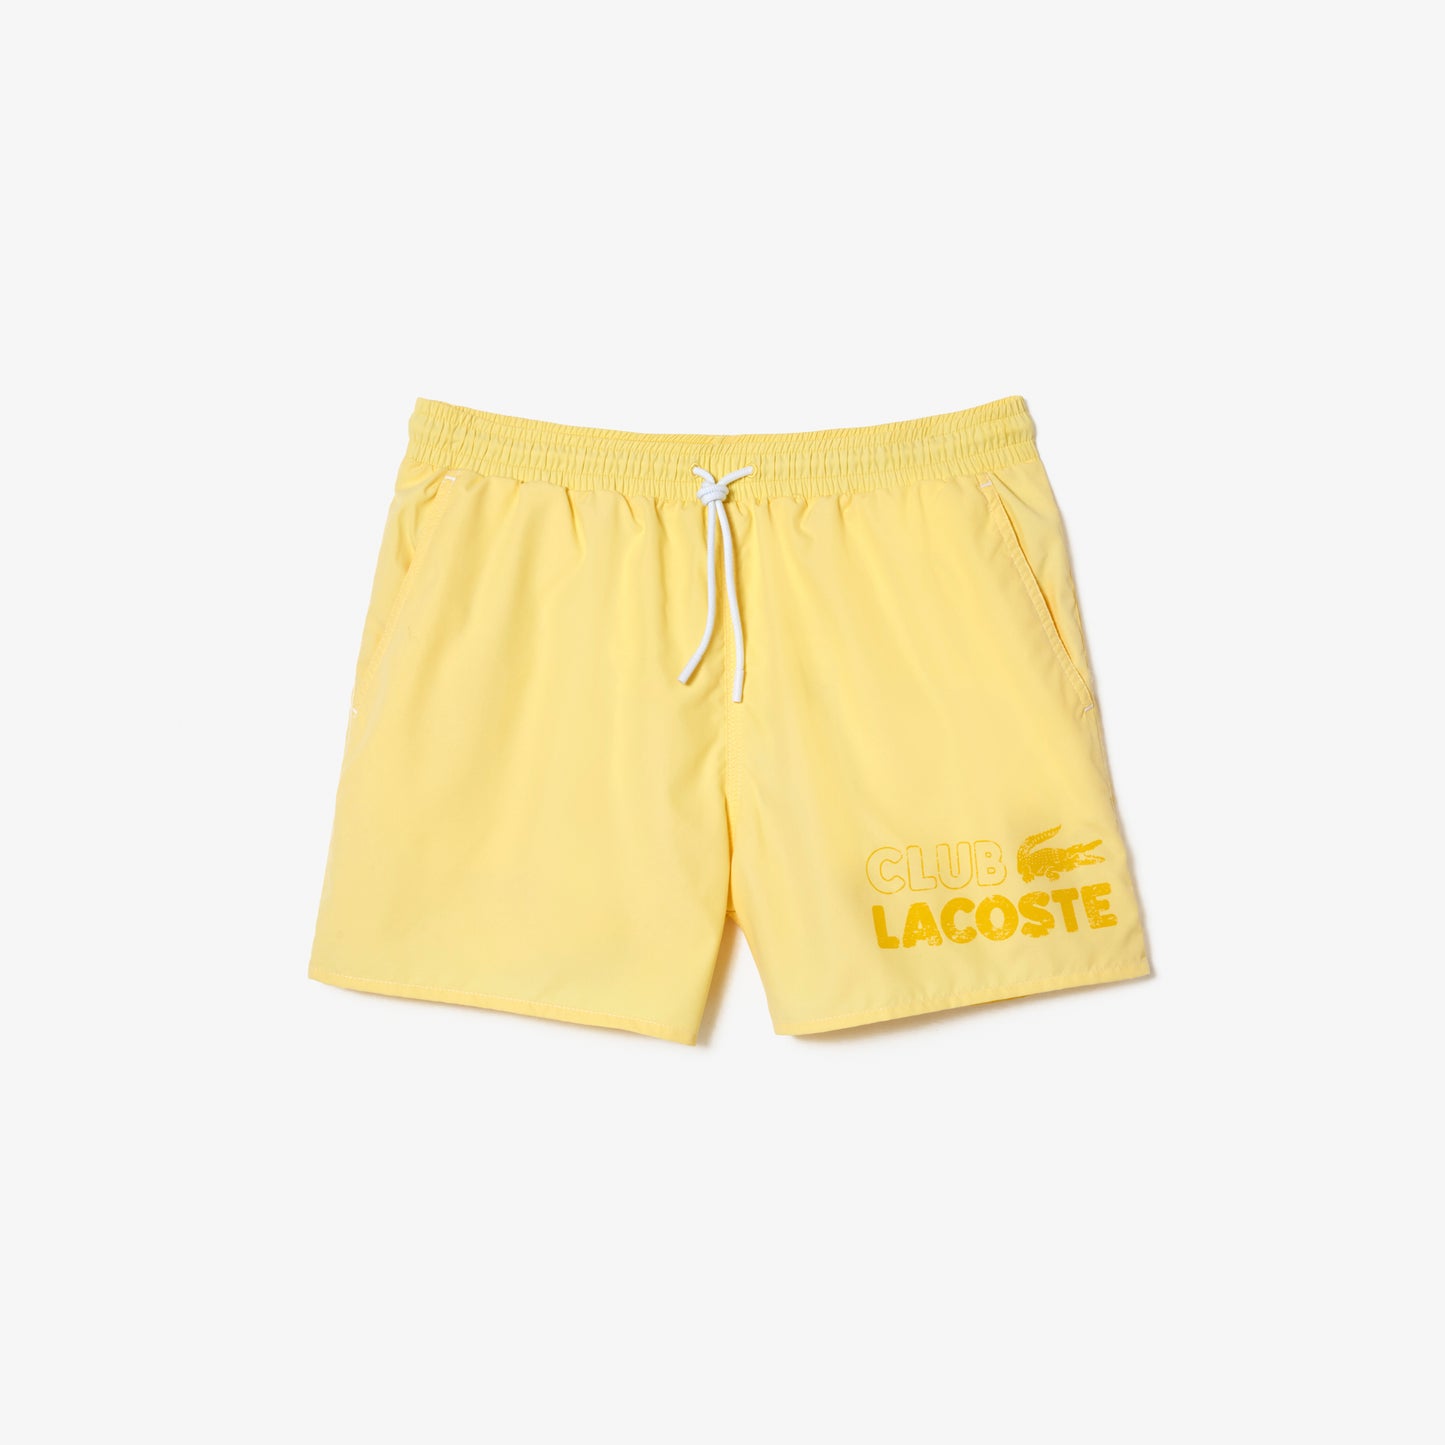 Men’s Lacoste Quick Dry Swim Trunks with Integrated Lining - MH5637